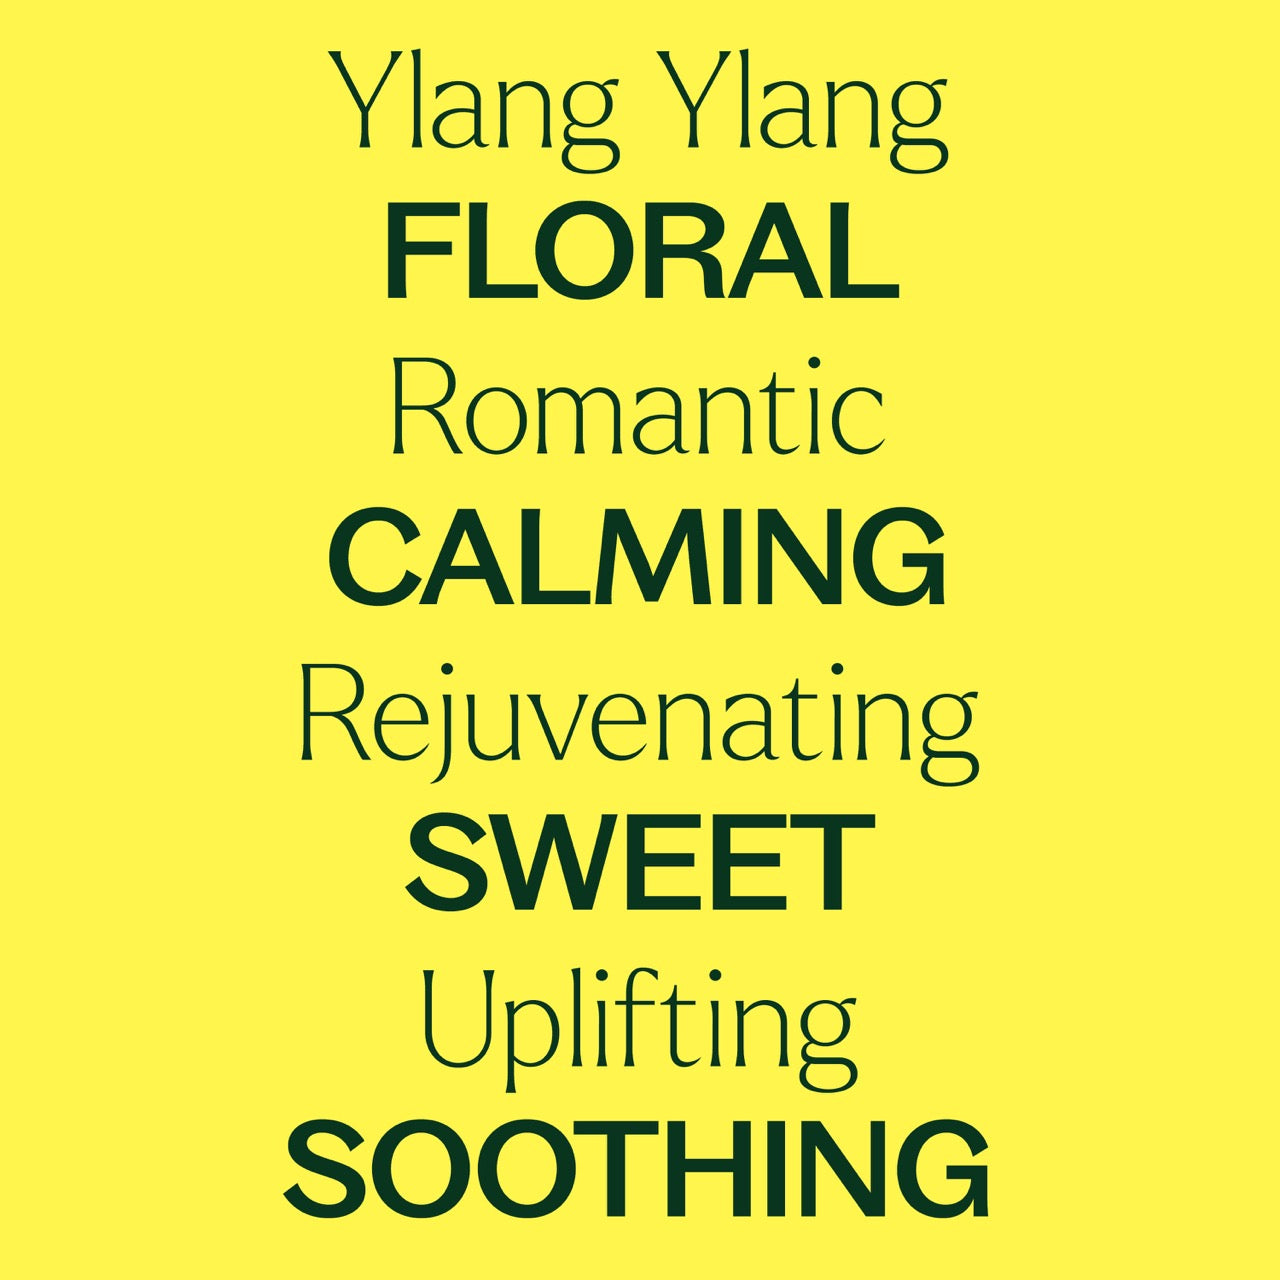 Ylang Ylang Complete Essential Oil with key features: floral, romantic, calming, rejuvenating, sweet, uplifting, soothing